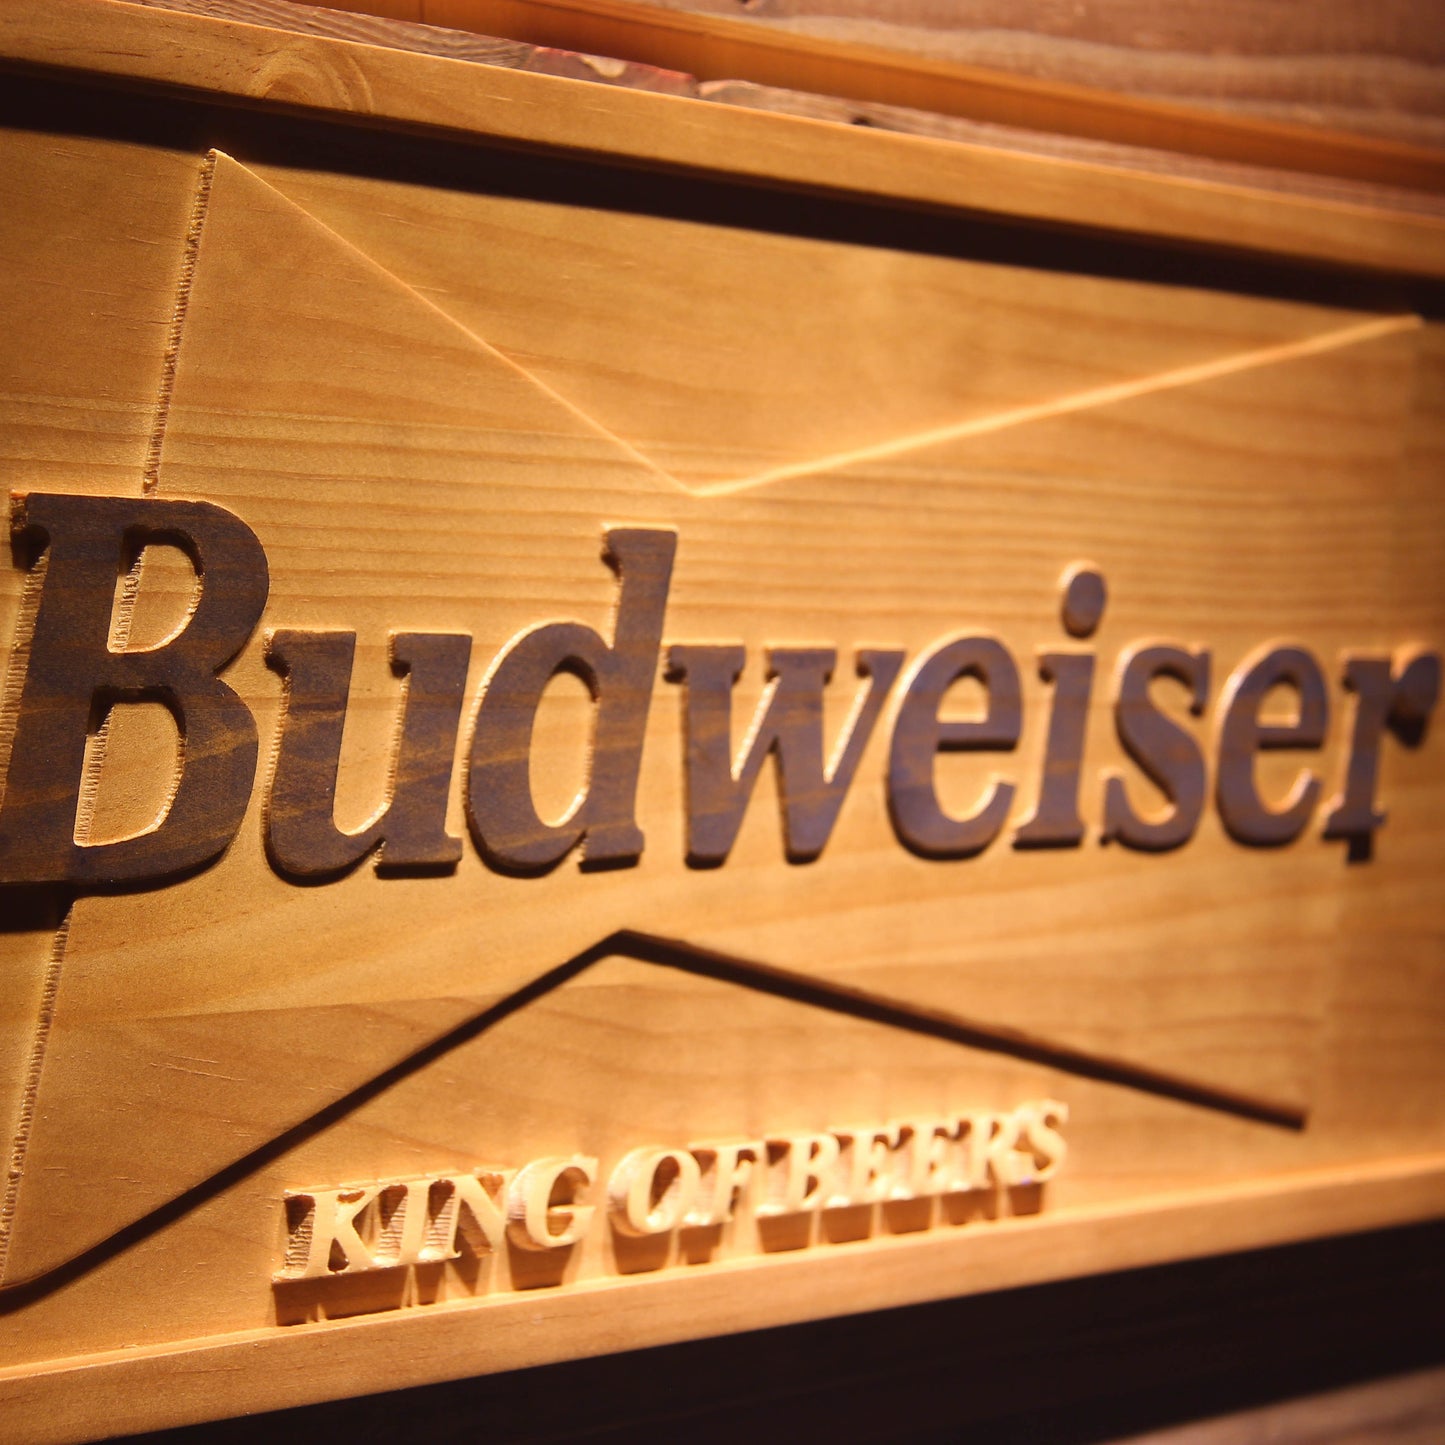 Budweiser King of  3D Wooden Signs by Woody Signs Co. - Handmade Crafted Unique Wooden Creative